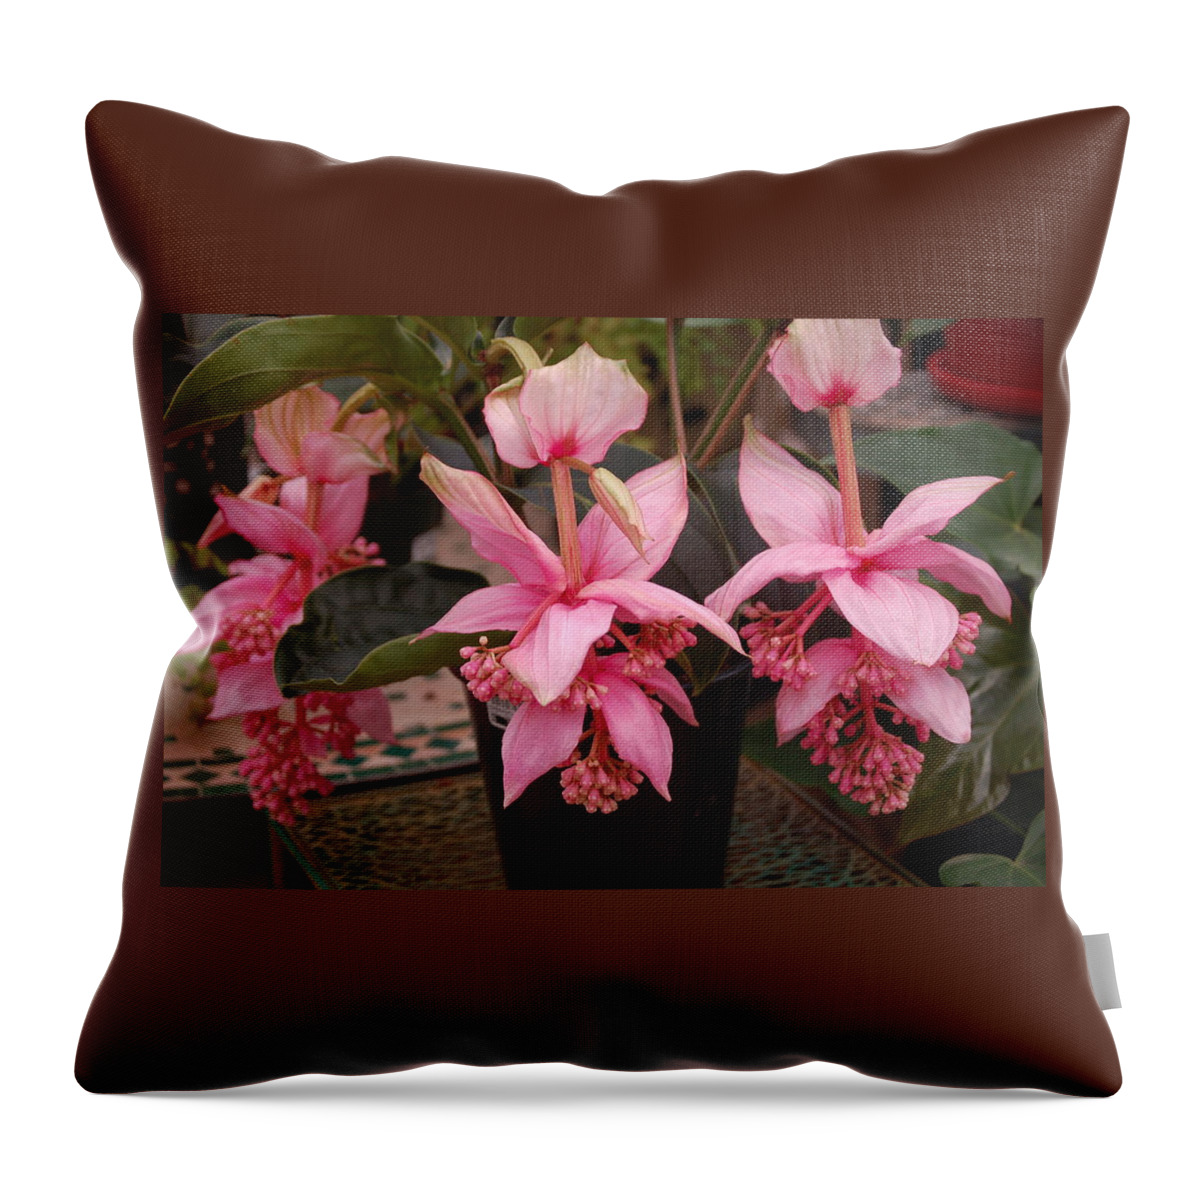 Flowers Throw Pillow featuring the photograph Medinilla Magnifica by Nancy Ayanna Wyatt